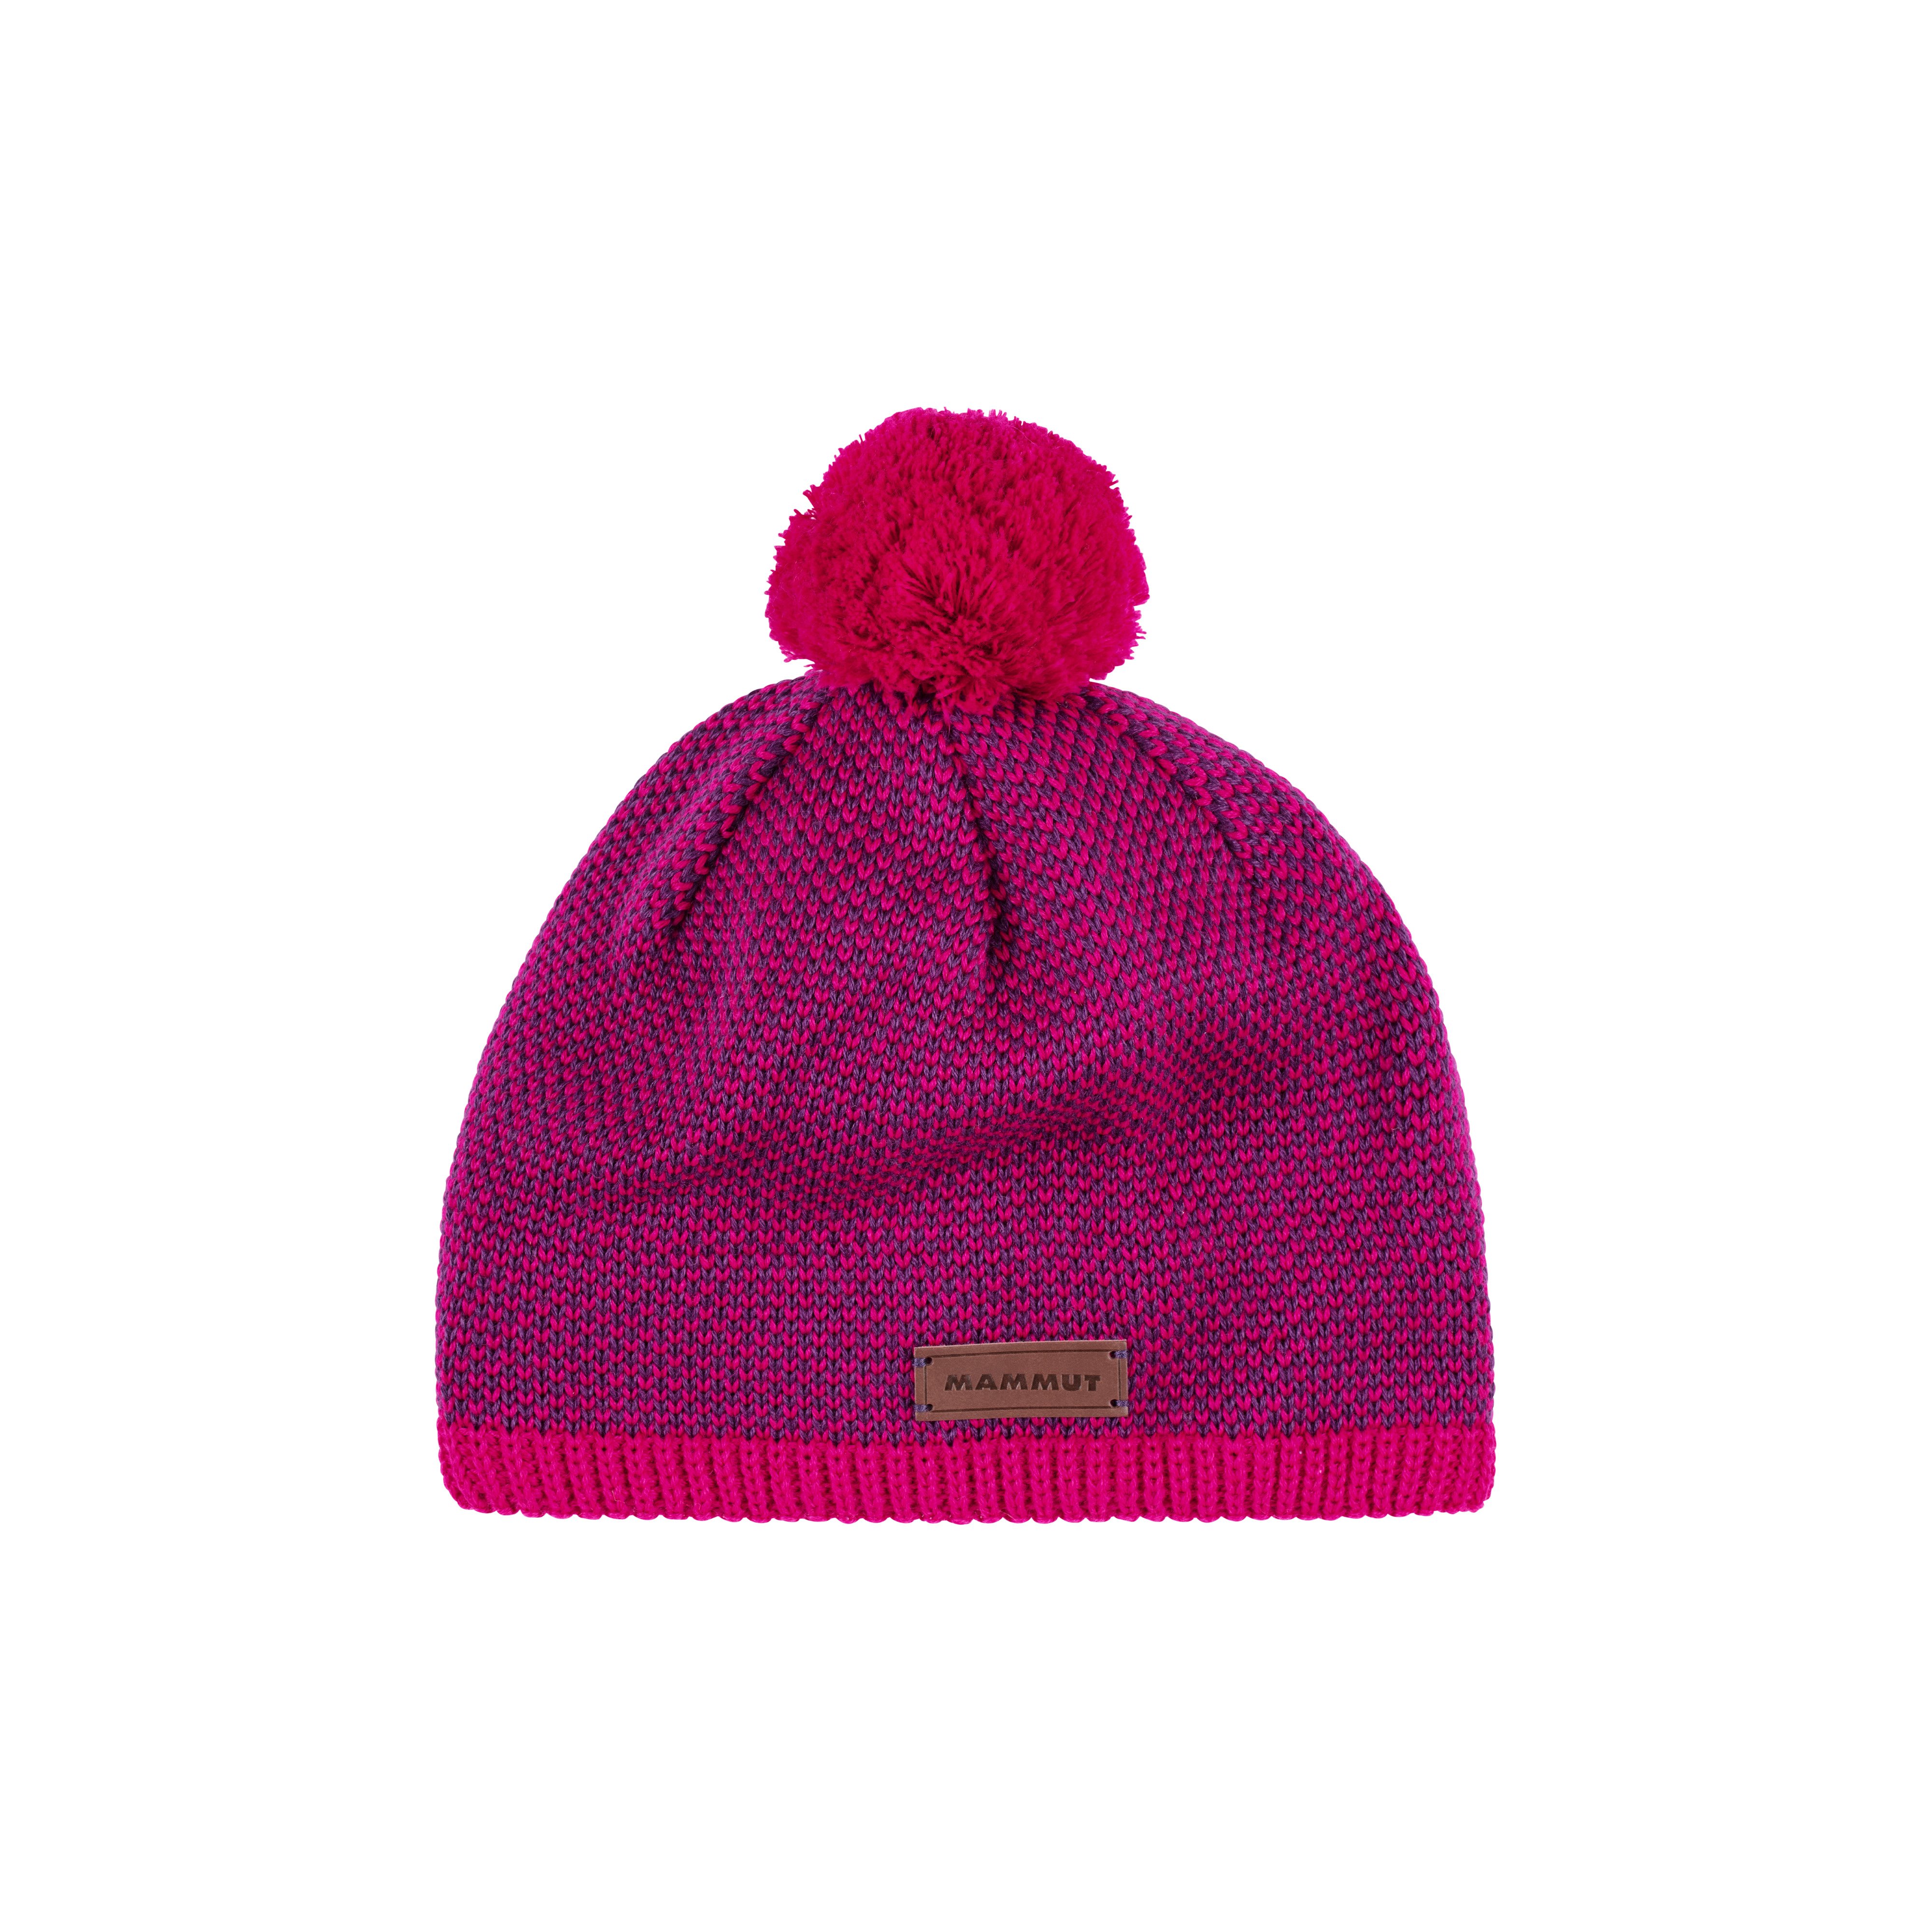 Snow Beanie - pink-grape, one size product image